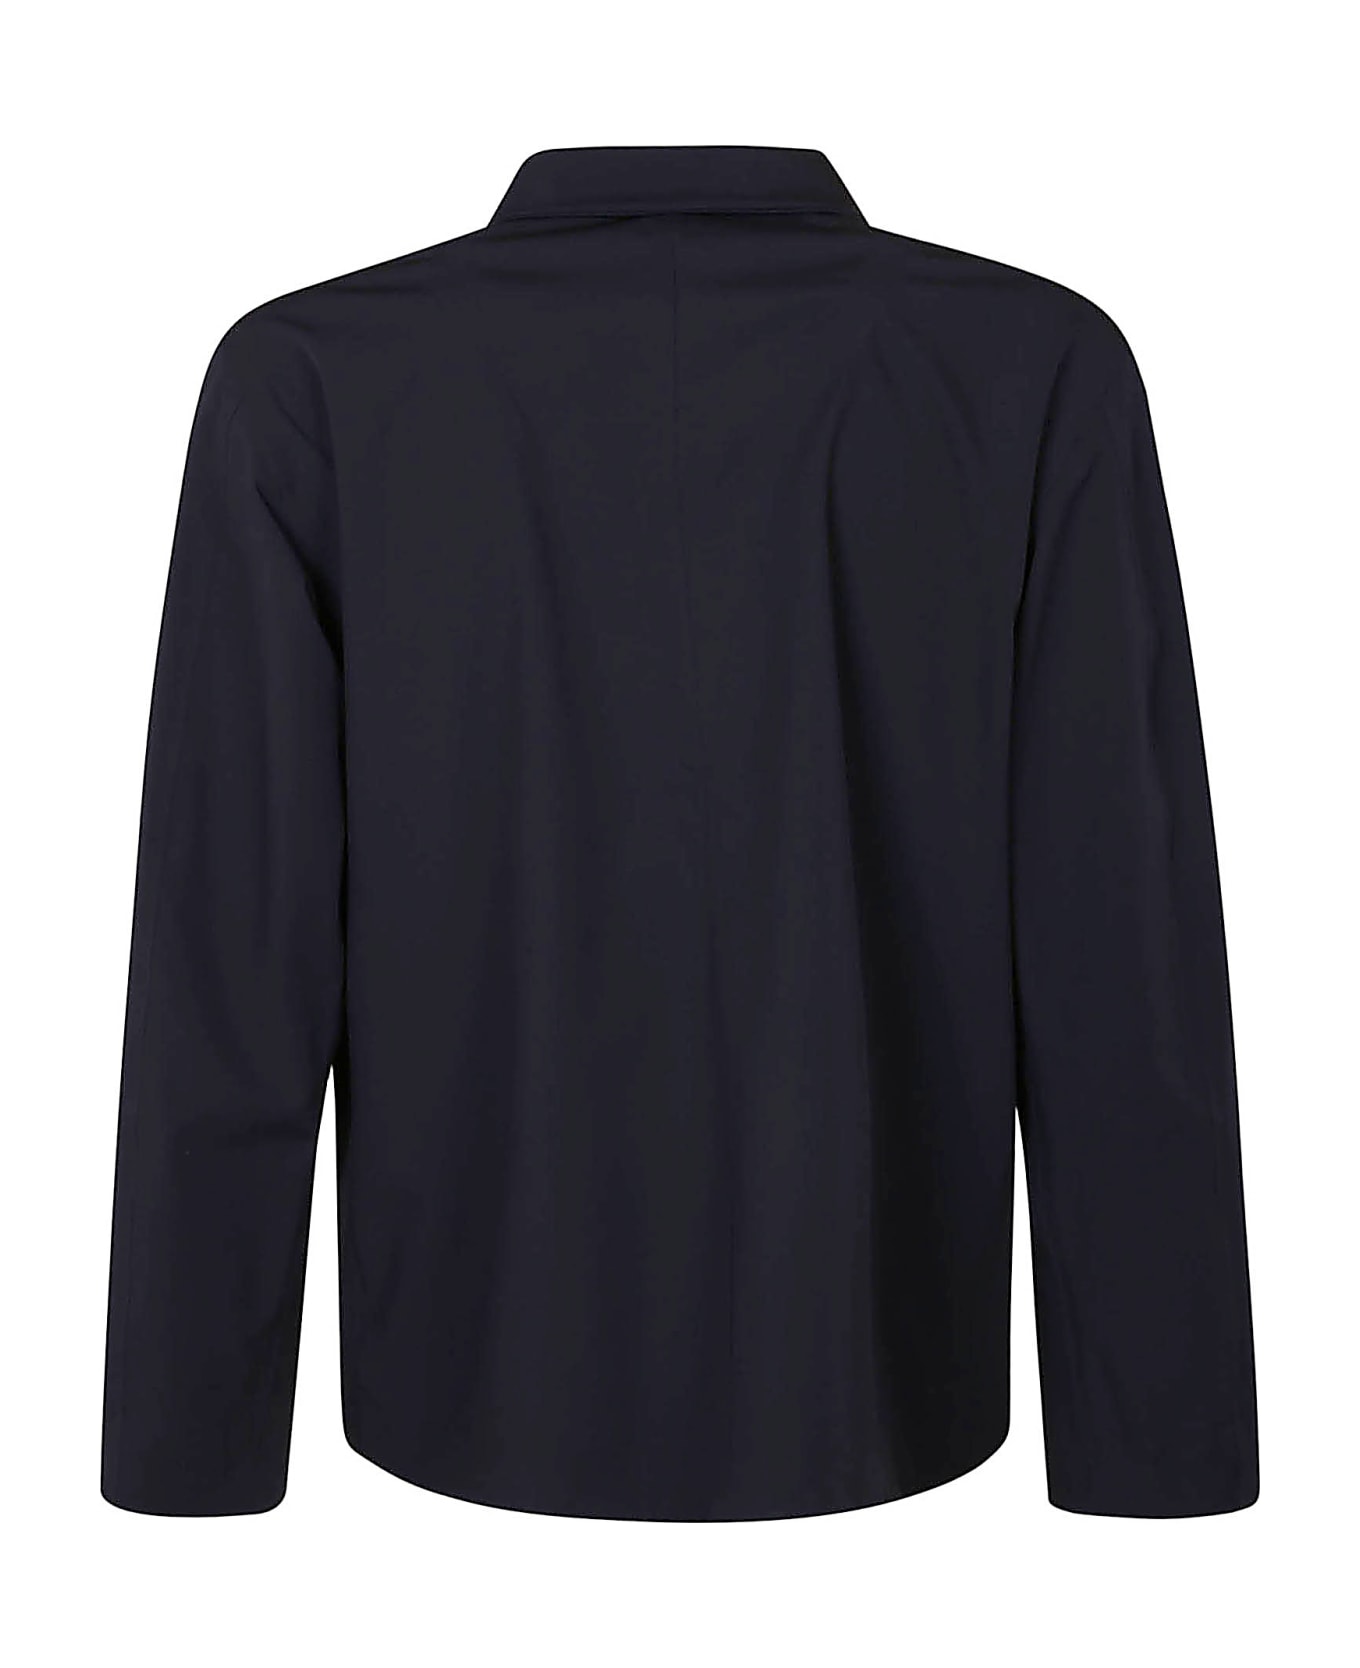 Herno Classic Side Pockets Buttoned Jacket - Blue Navy